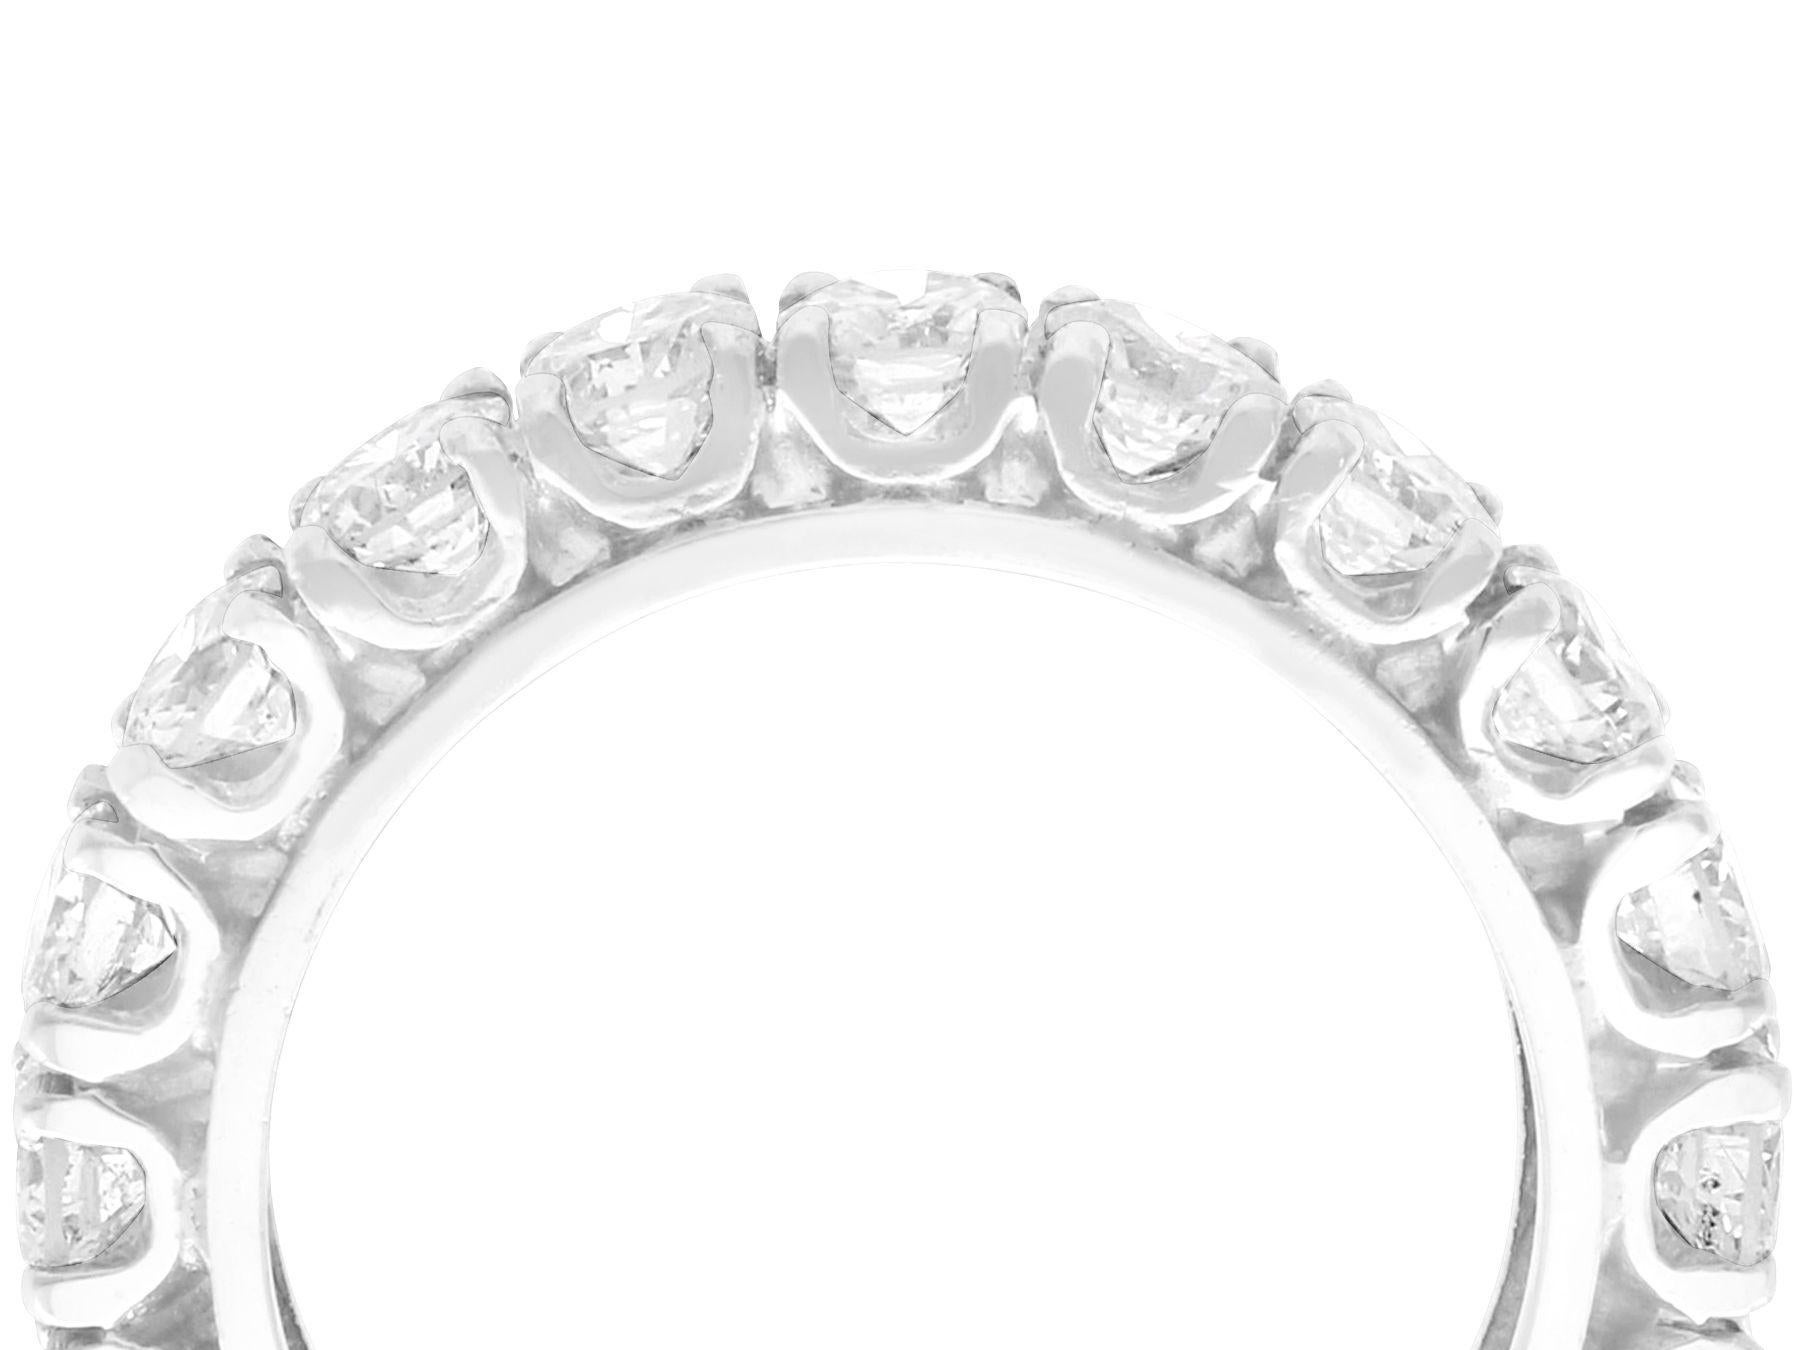 A stunning, fine and impressive vintage 1950's 2.55 carat diamond and platinum full eternity ring; part of our diverse diamond jewelry and estate jewelry collections.

This stunning, fine and impressive 1950s diamond eternity ring has been crafted